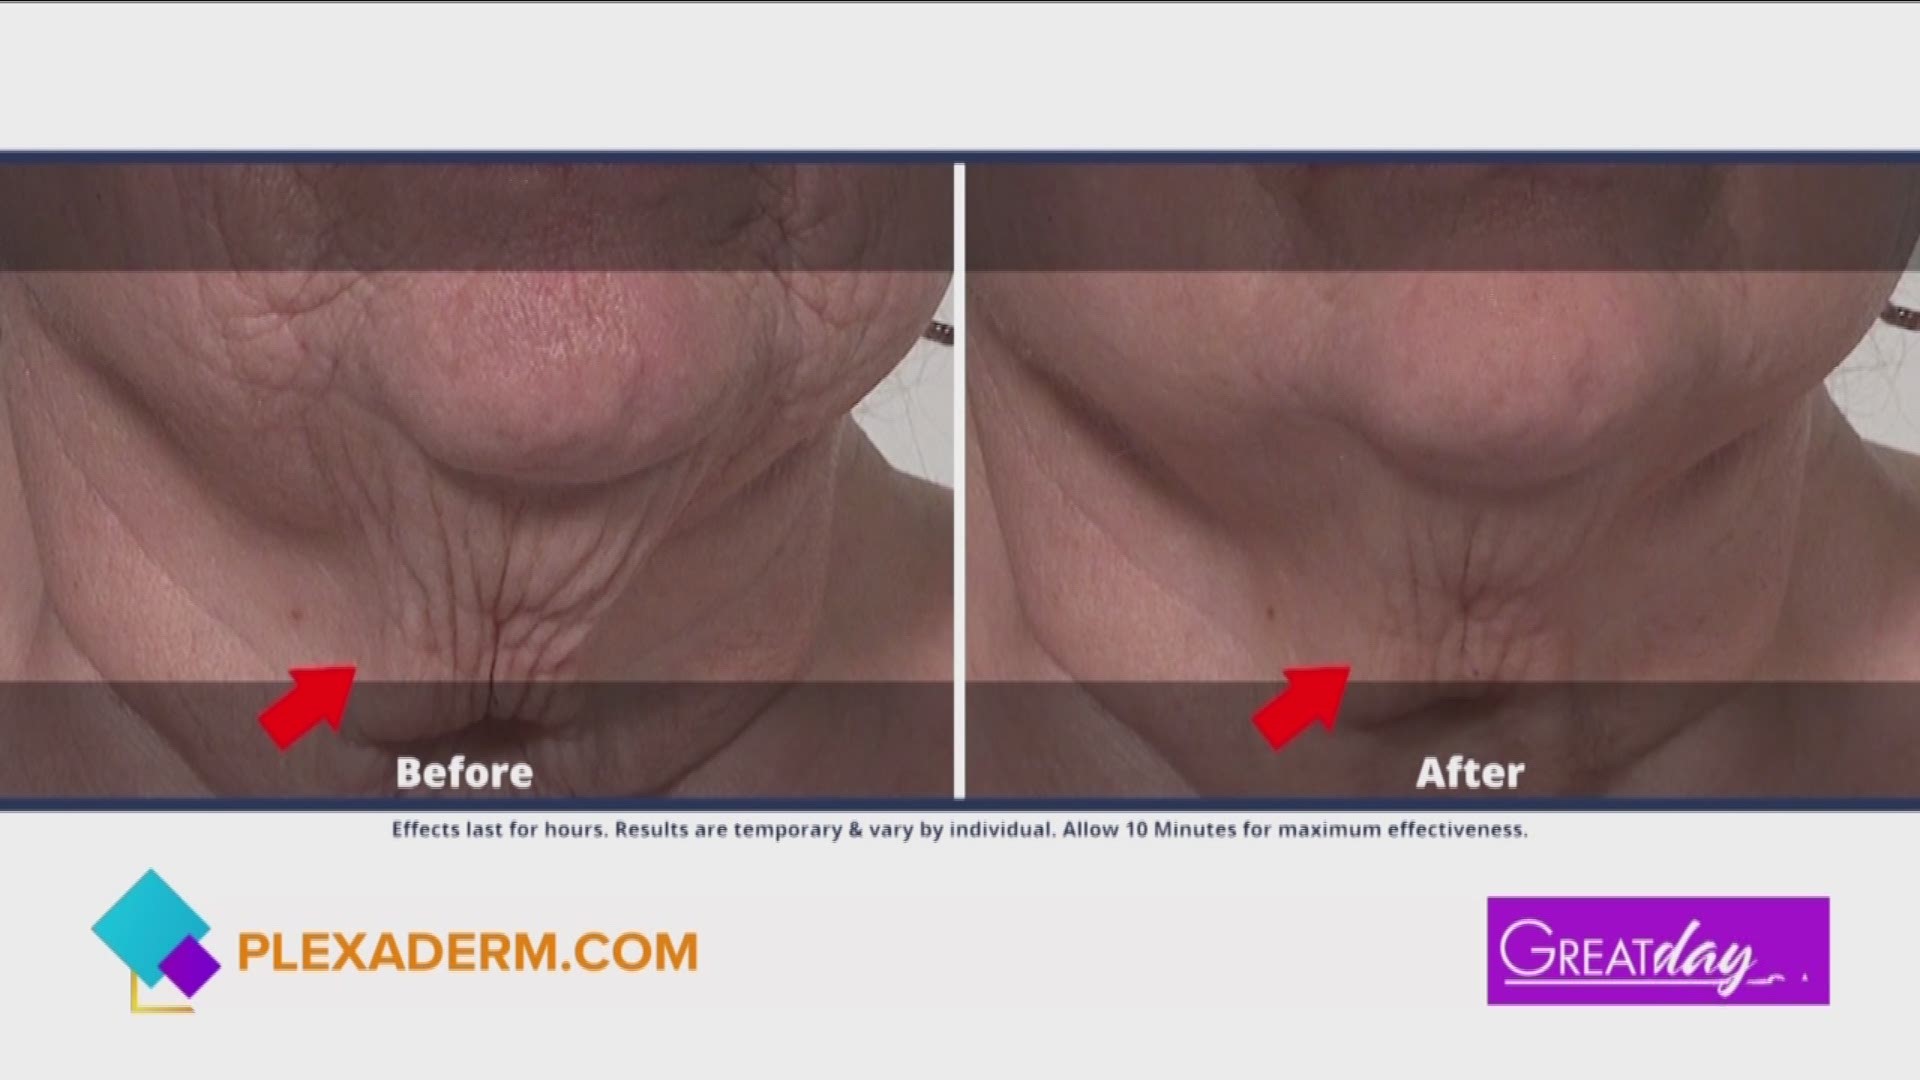 Plexaderm is helping men and women slow the aging process at home! Their serum dries in just 10 seconds and results last!